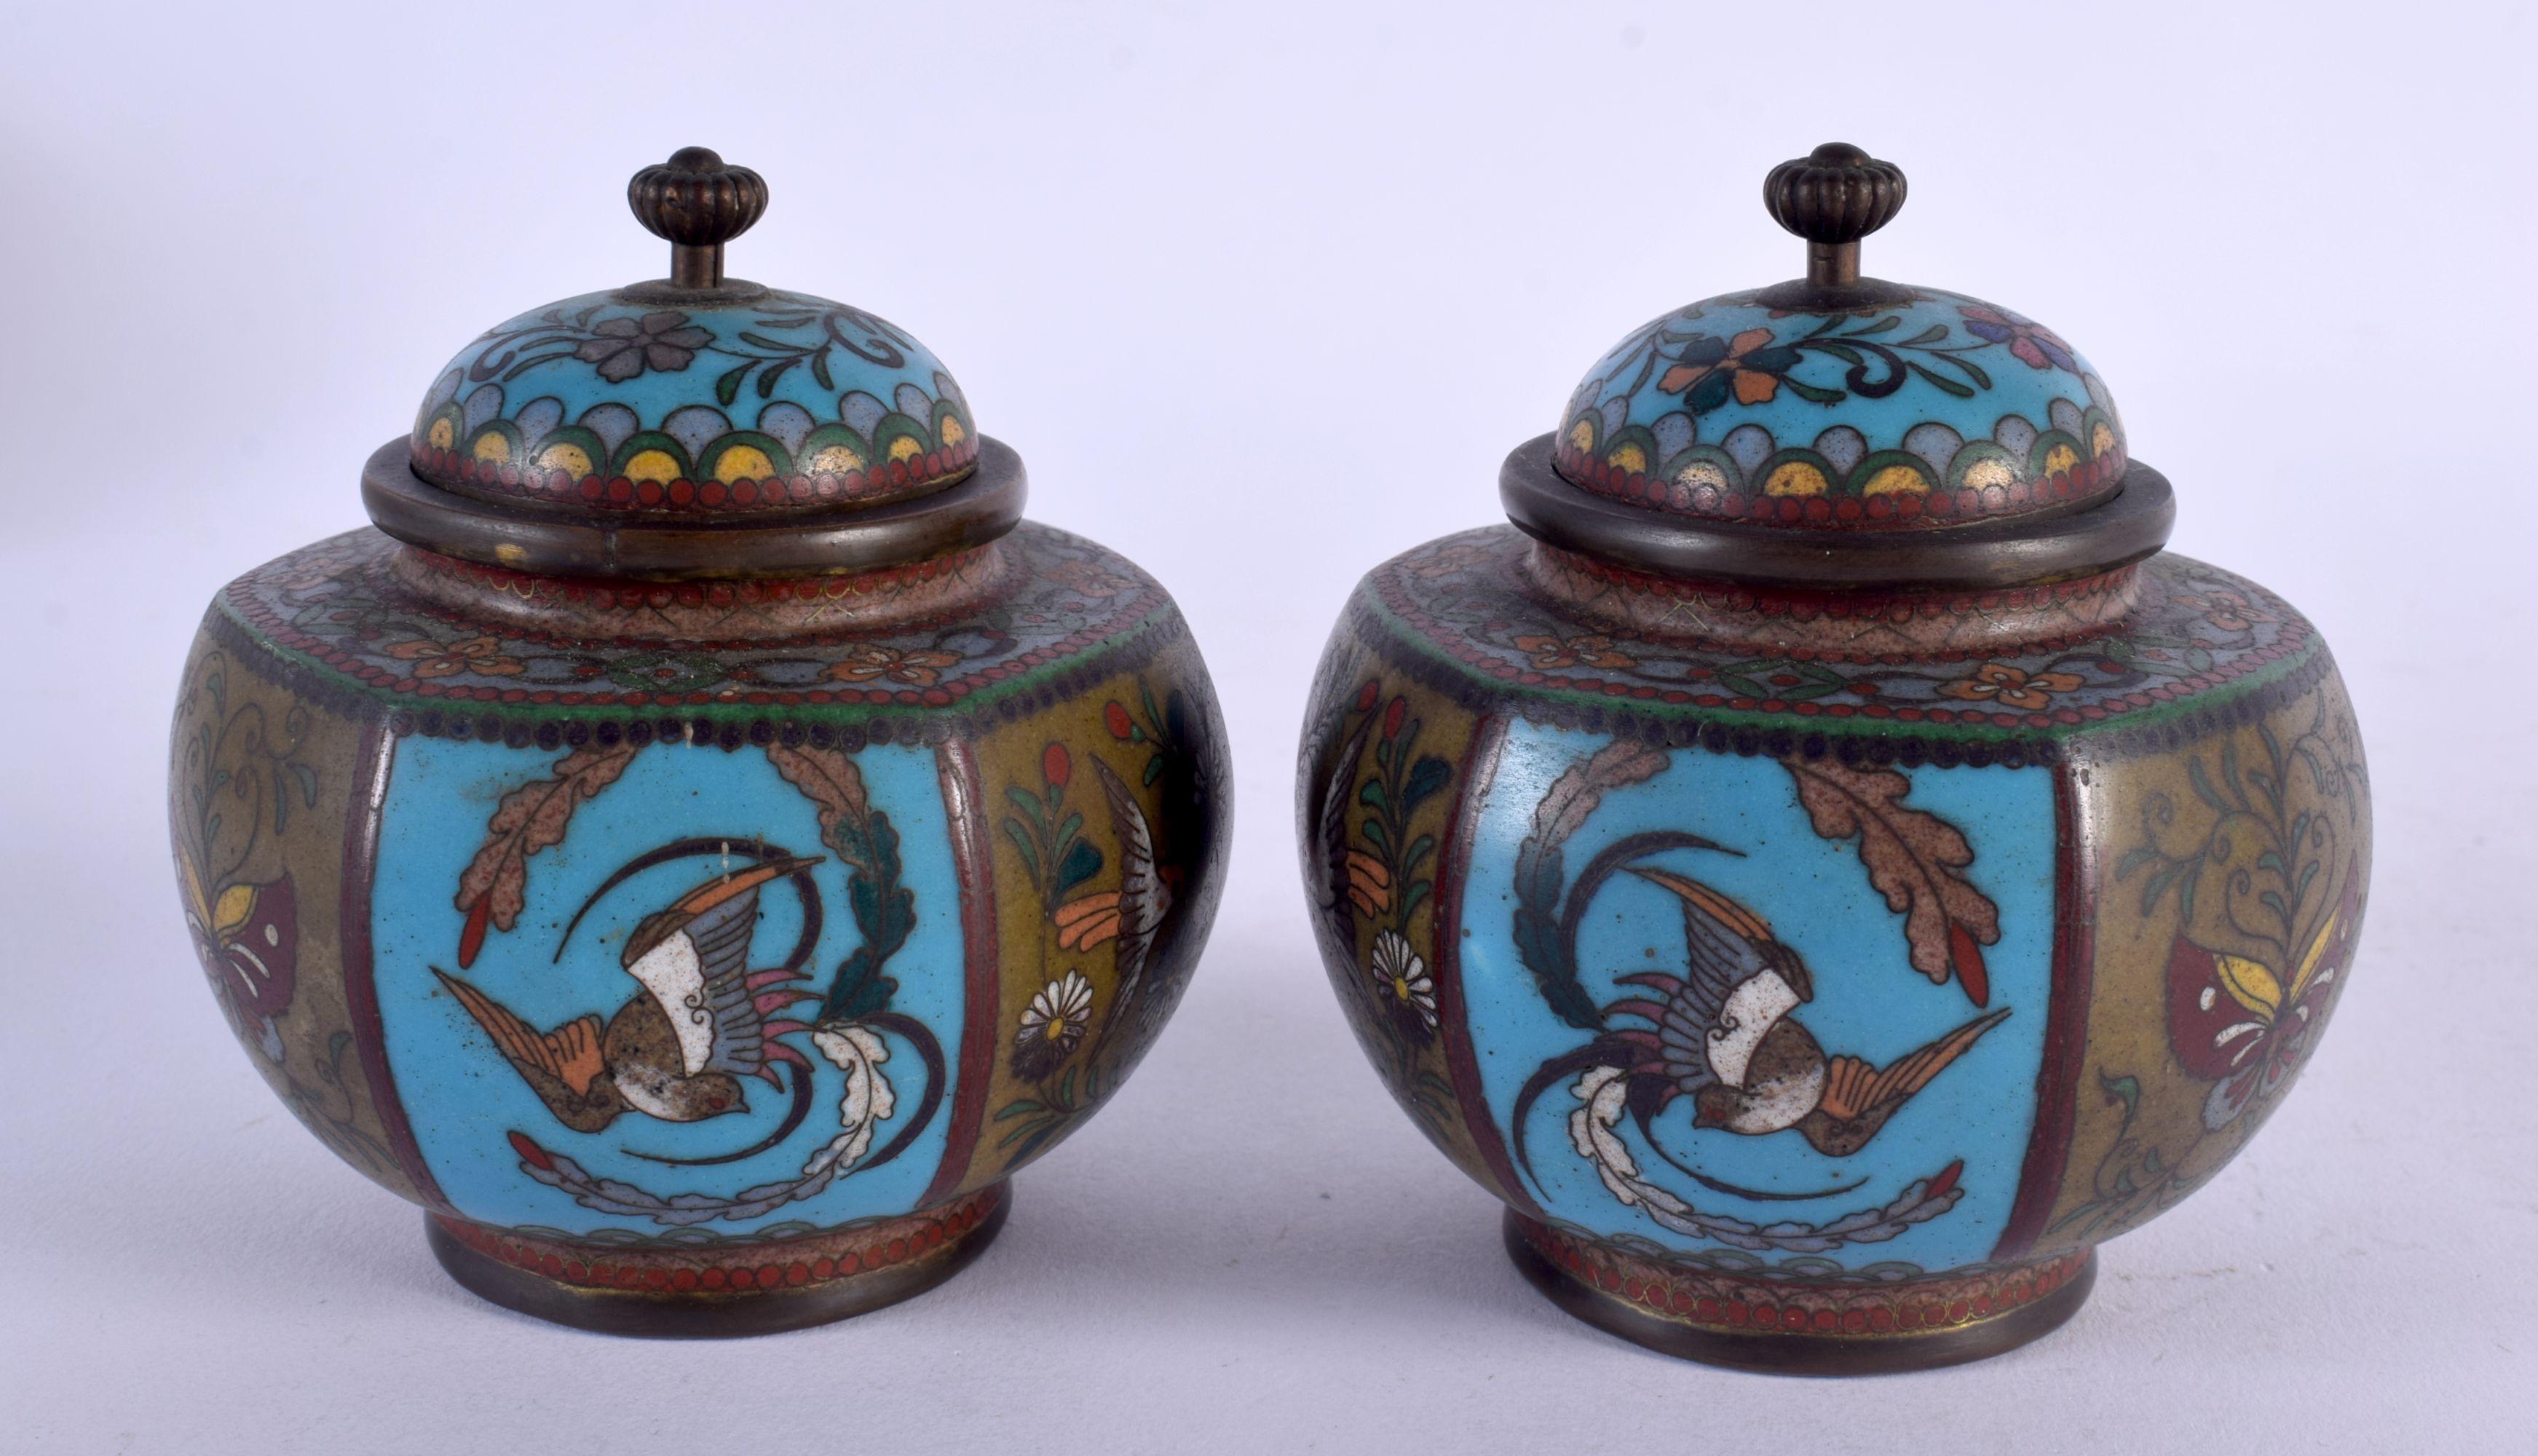 A PAIR OF 19TH CENTURY JAPANESE MEIJI PERIOD CLOISONNE ENAMEL JARS AND COVERS decorated with insects - Image 2 of 5